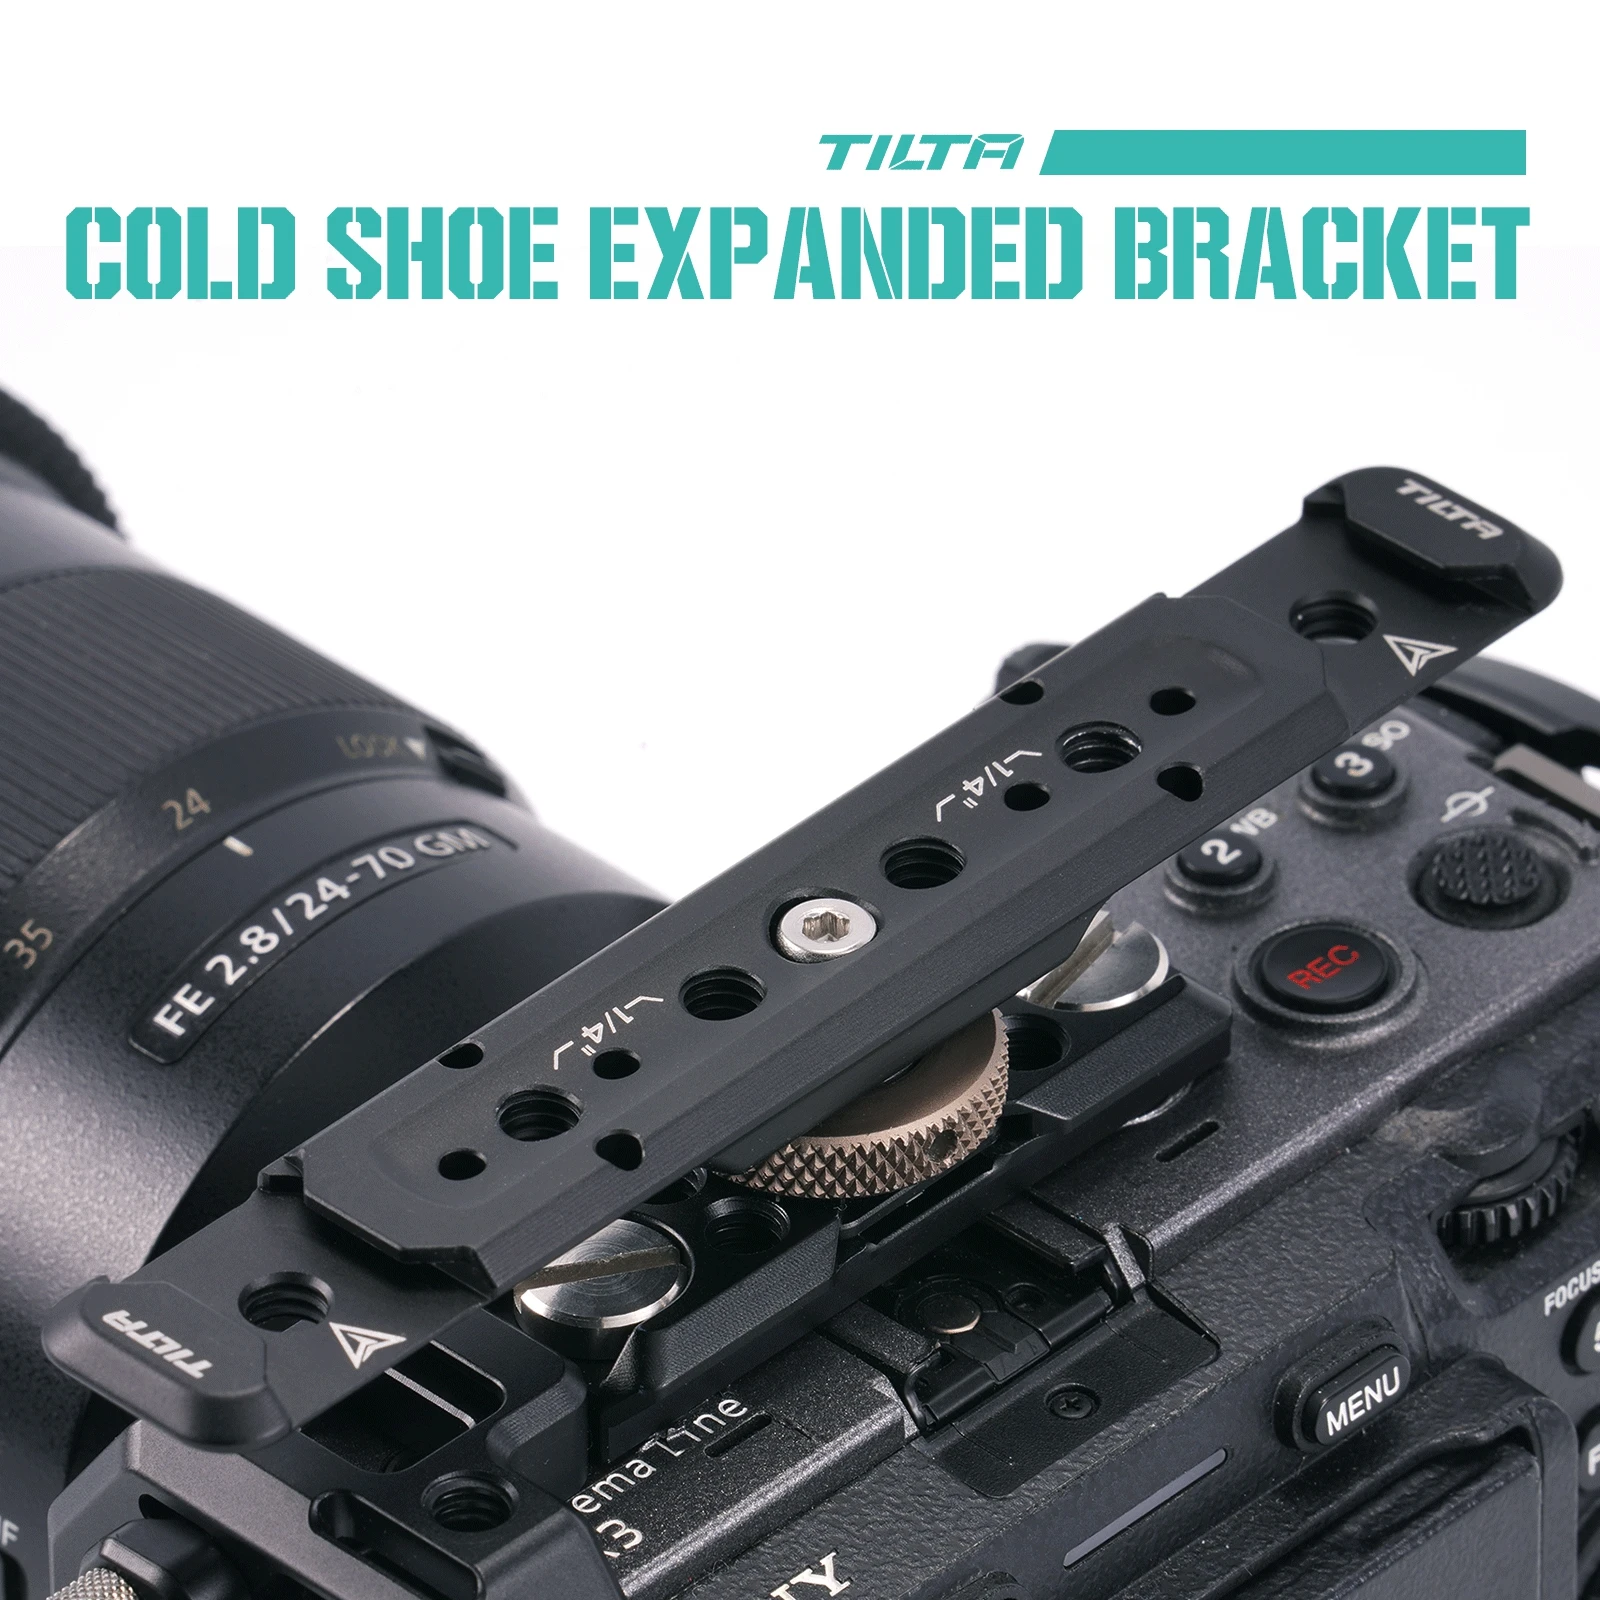 

TILTA TA-CEB-B Dual Cold Shoe Expanded Bracket 1/4-20 Threads NATO rail Adjustable Cold Shoe Accessory Mounting Brackets